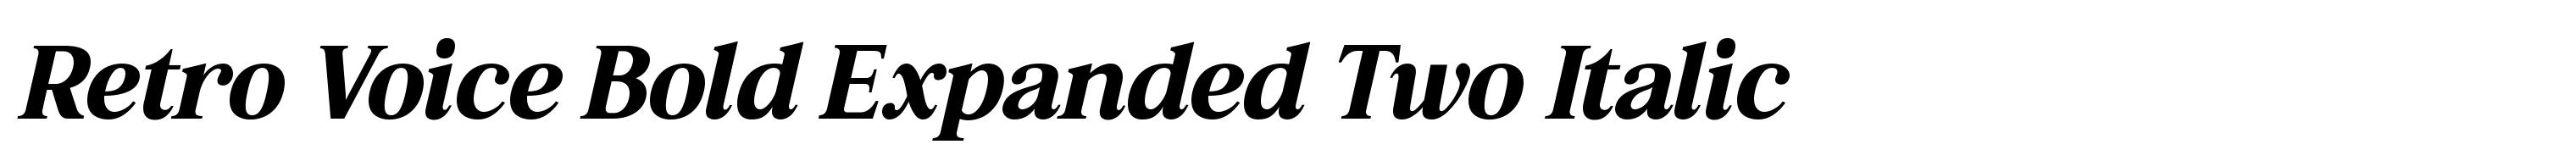 Retro Voice Bold Expanded Two Italic